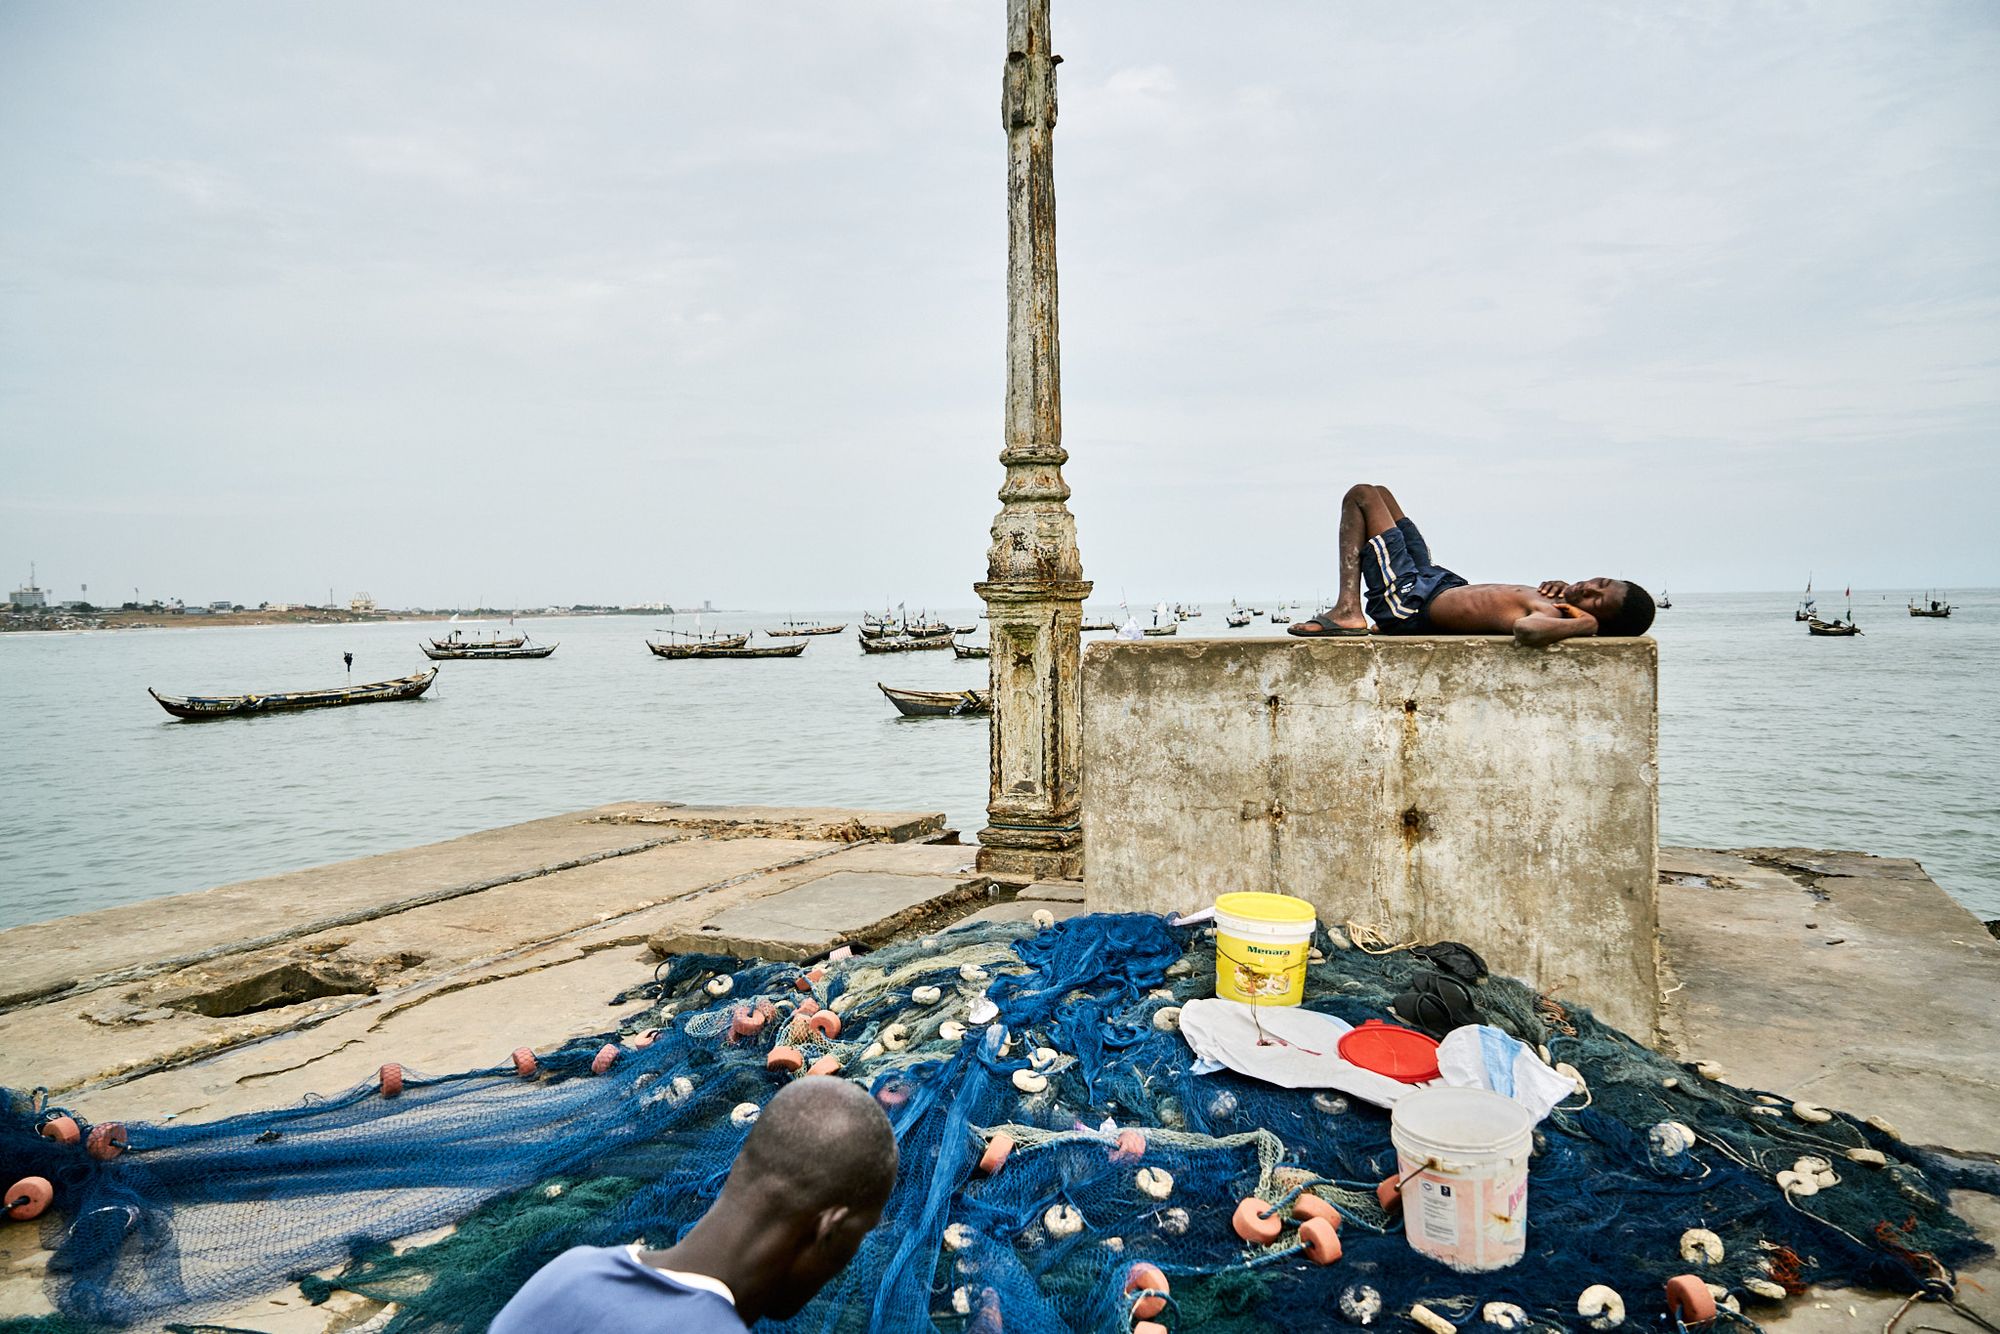 A kid is sleeping on the pier at the old fishing harbour in Jamestown, Accra, Ghana